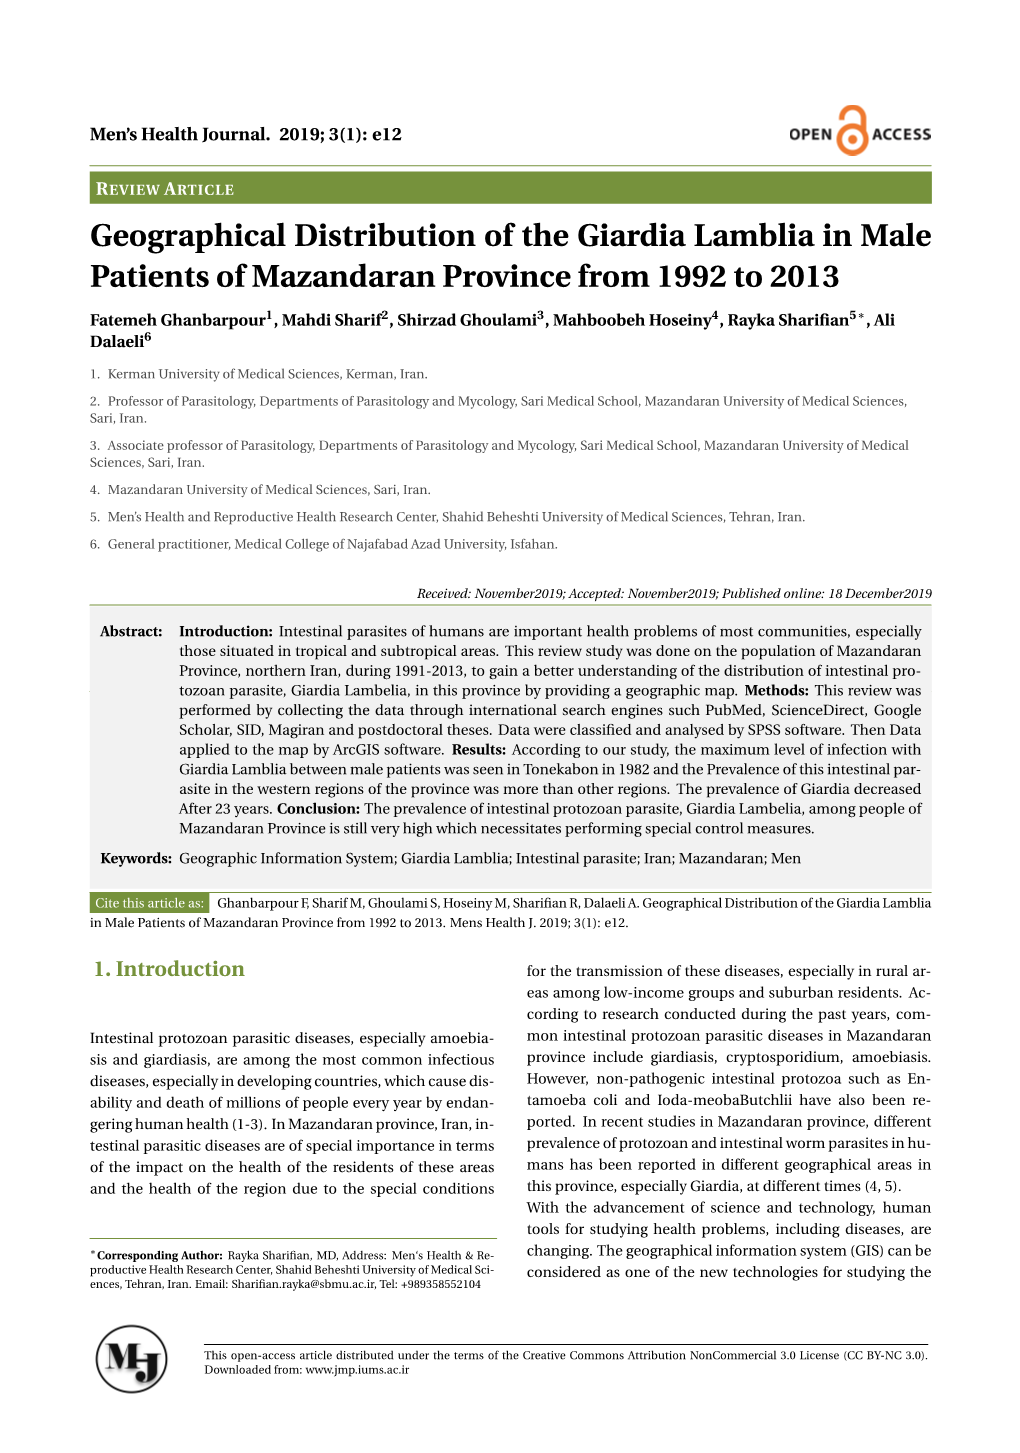 Geographical Distribution of the Giardia Lamblia in Male Patients of Mazandaran Province from 1992 to 2013